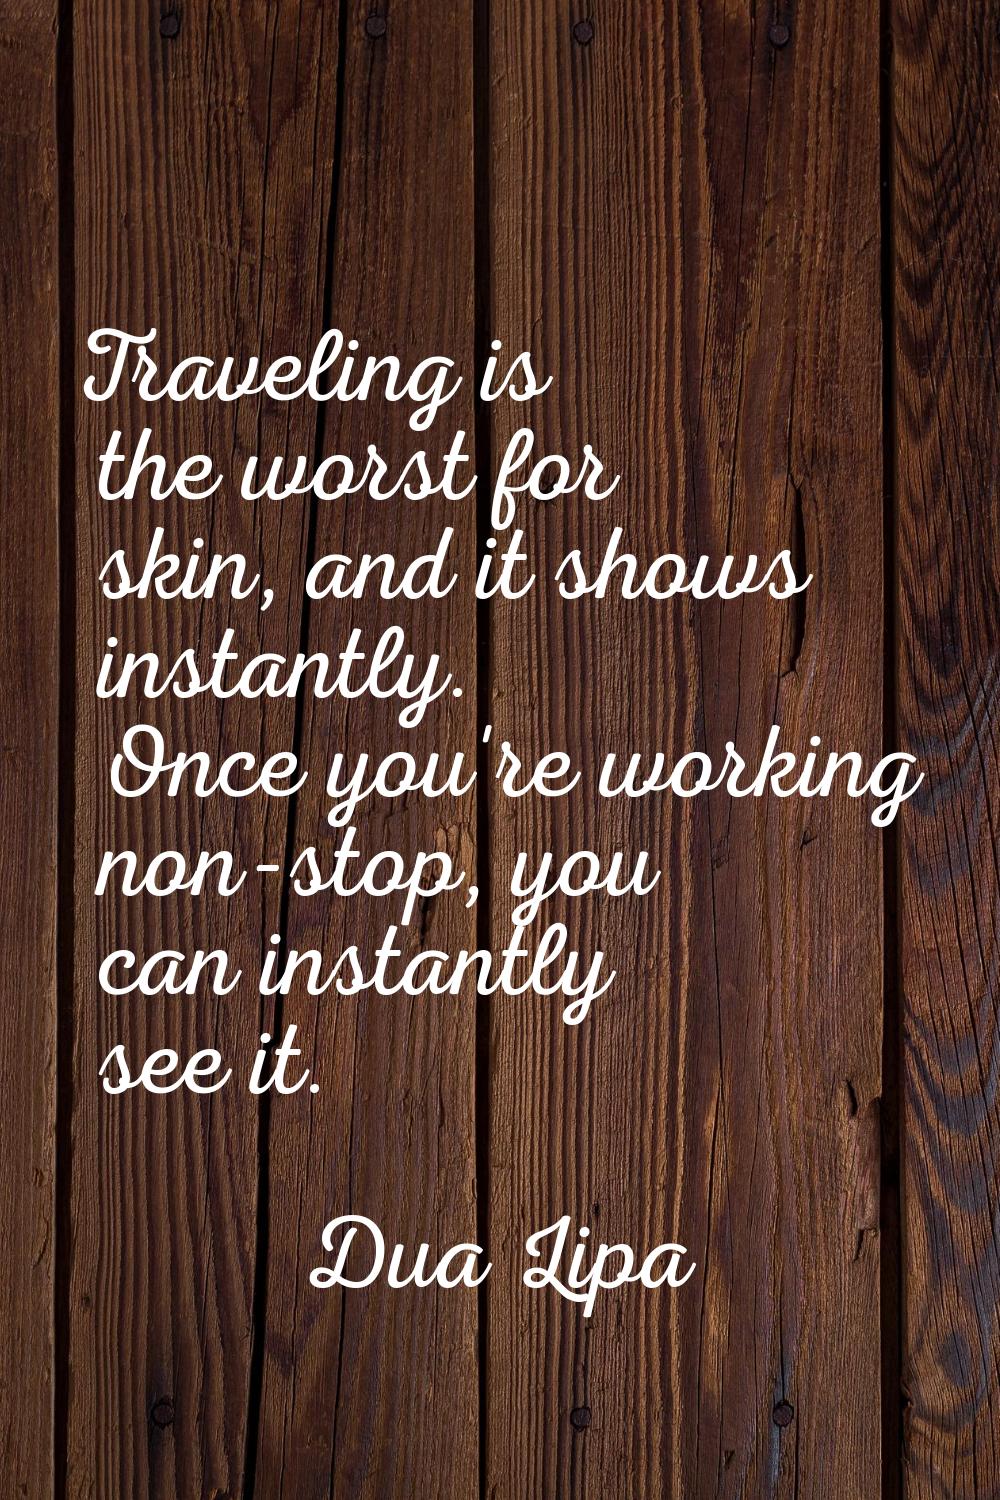 Traveling is the worst for skin, and it shows instantly. Once you're working non-stop, you can inst